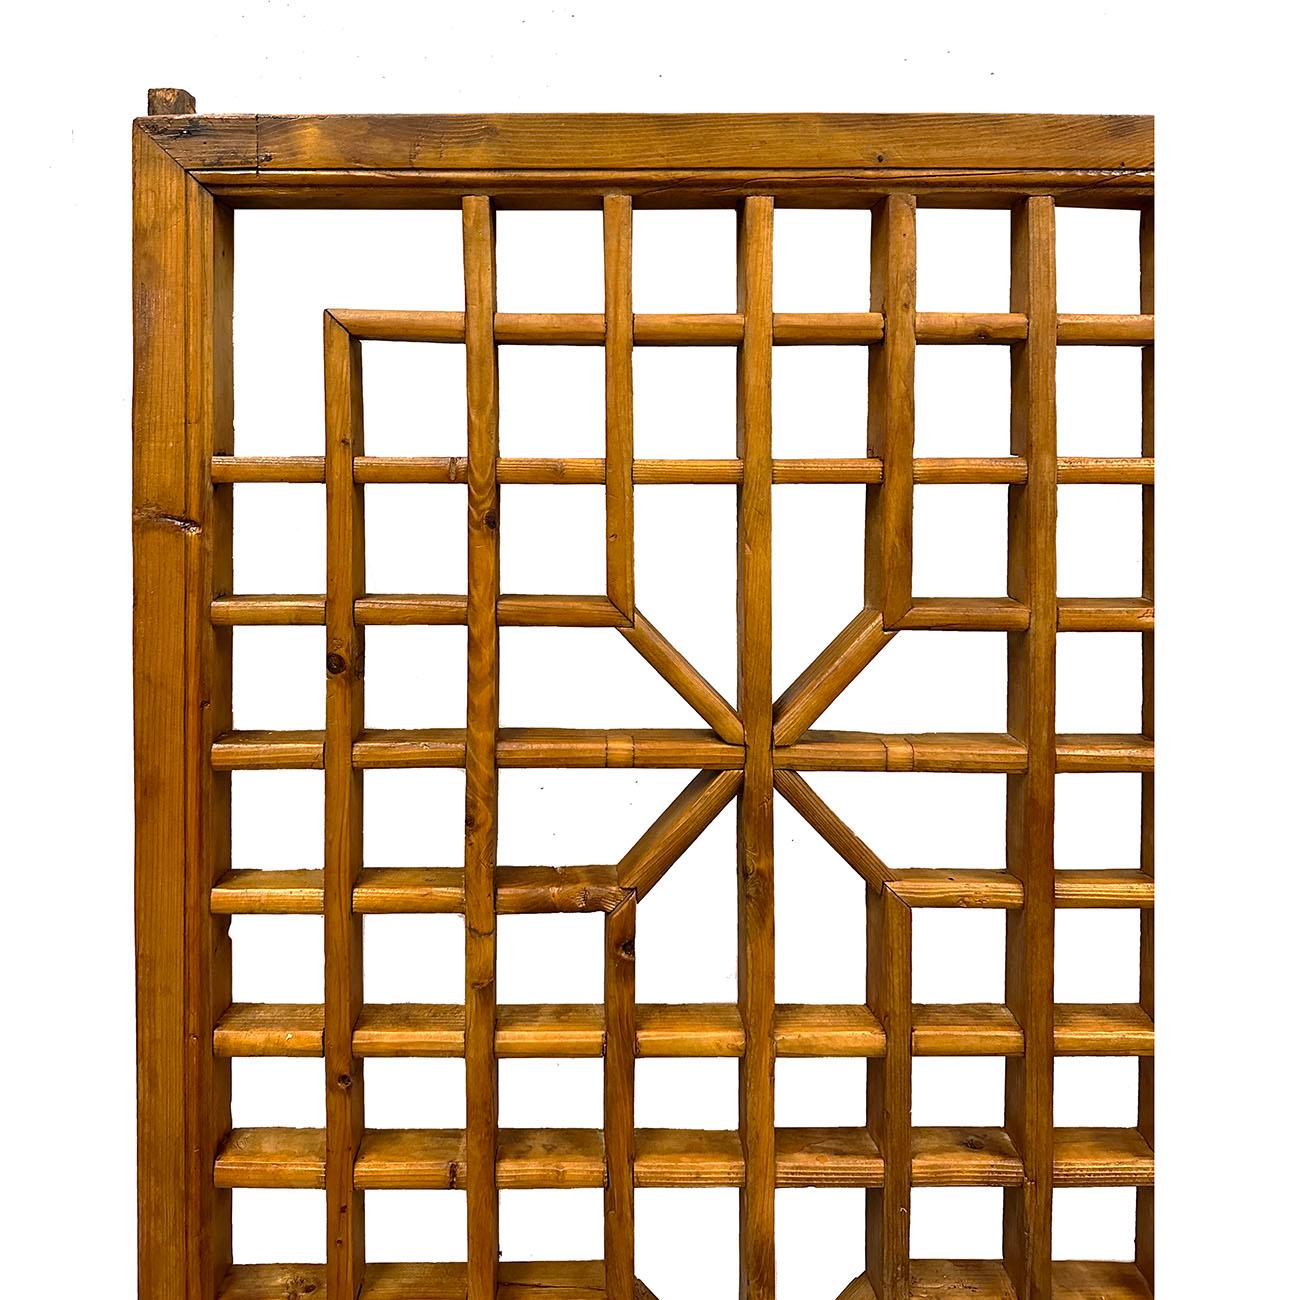 This Chinese Qing Dynasty period large carved elm wood interior window panel from the late 19th century, with fretwork design, Created in China during the Qing Dynasty in the later years of the 19th century, of this architectural interior window